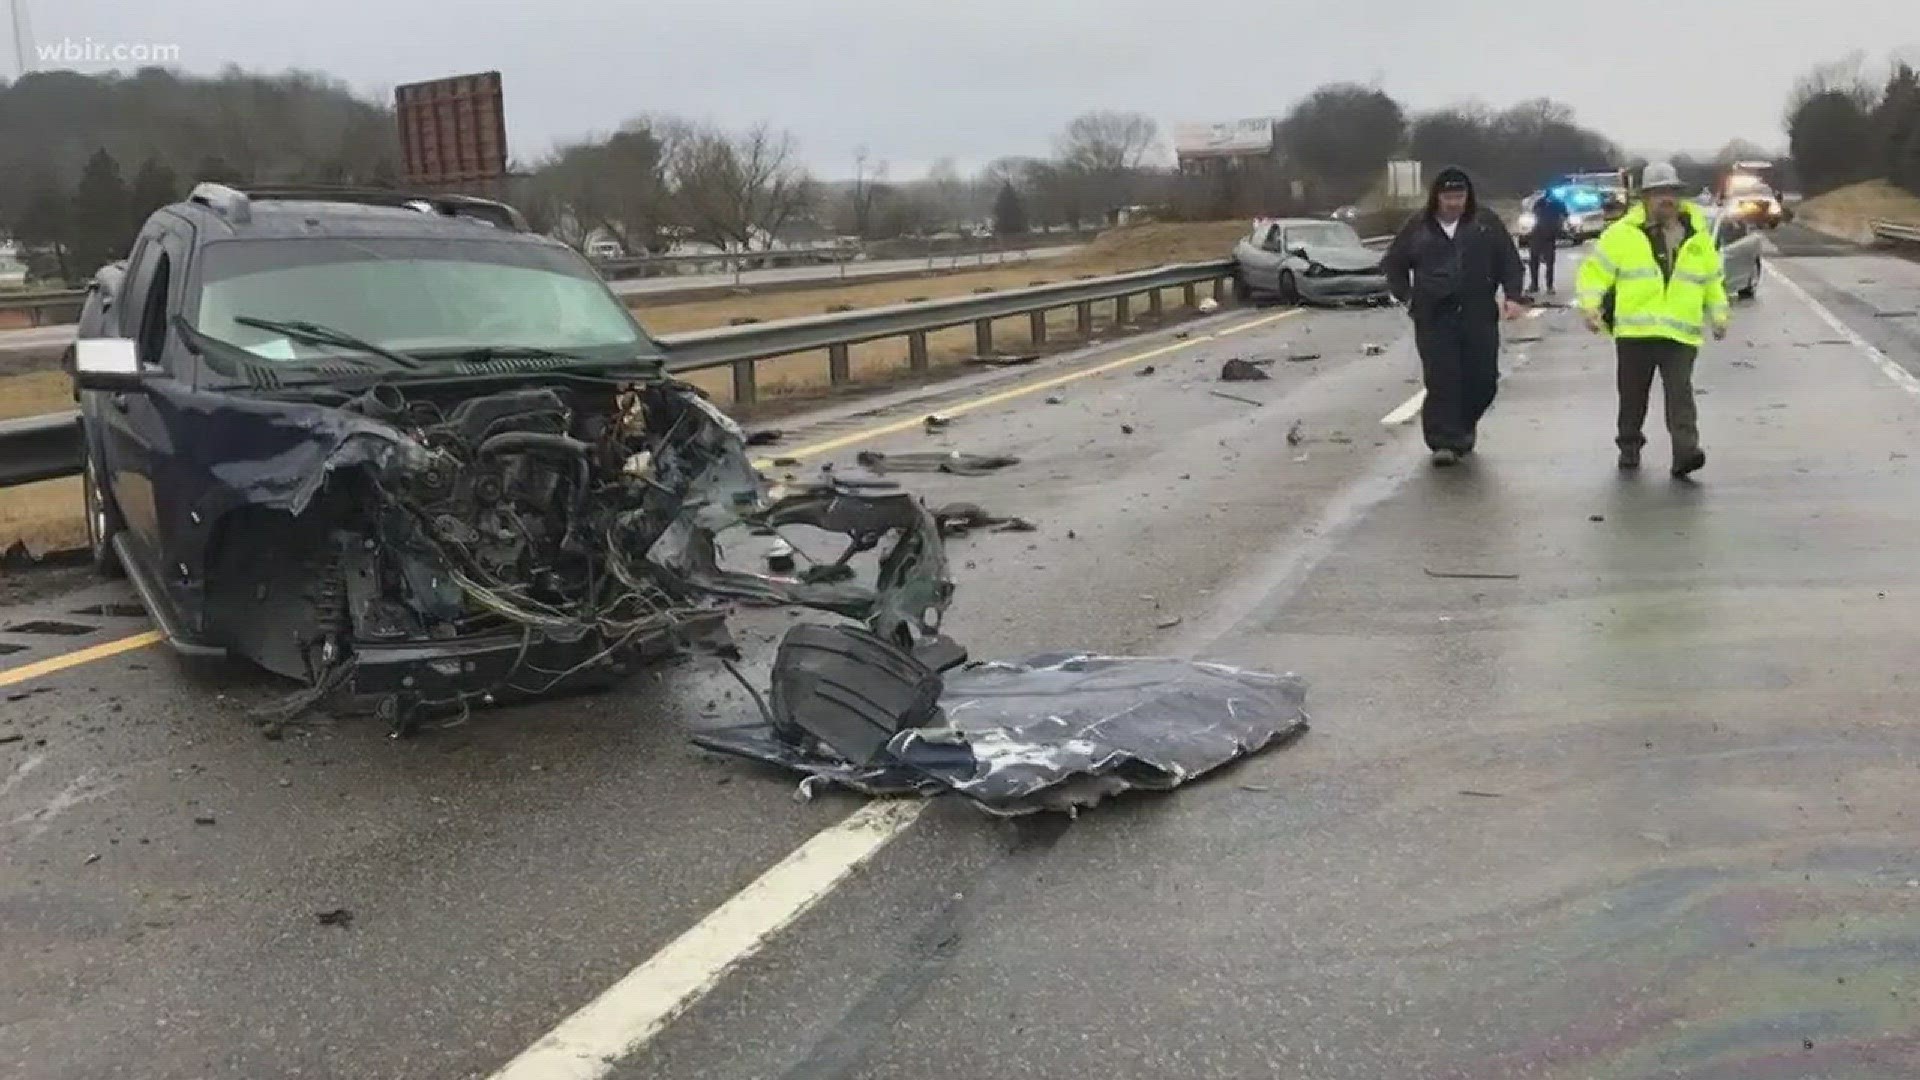 Feb. 12, 2018: one person is dead following a crash on I-40 in Cocke County.